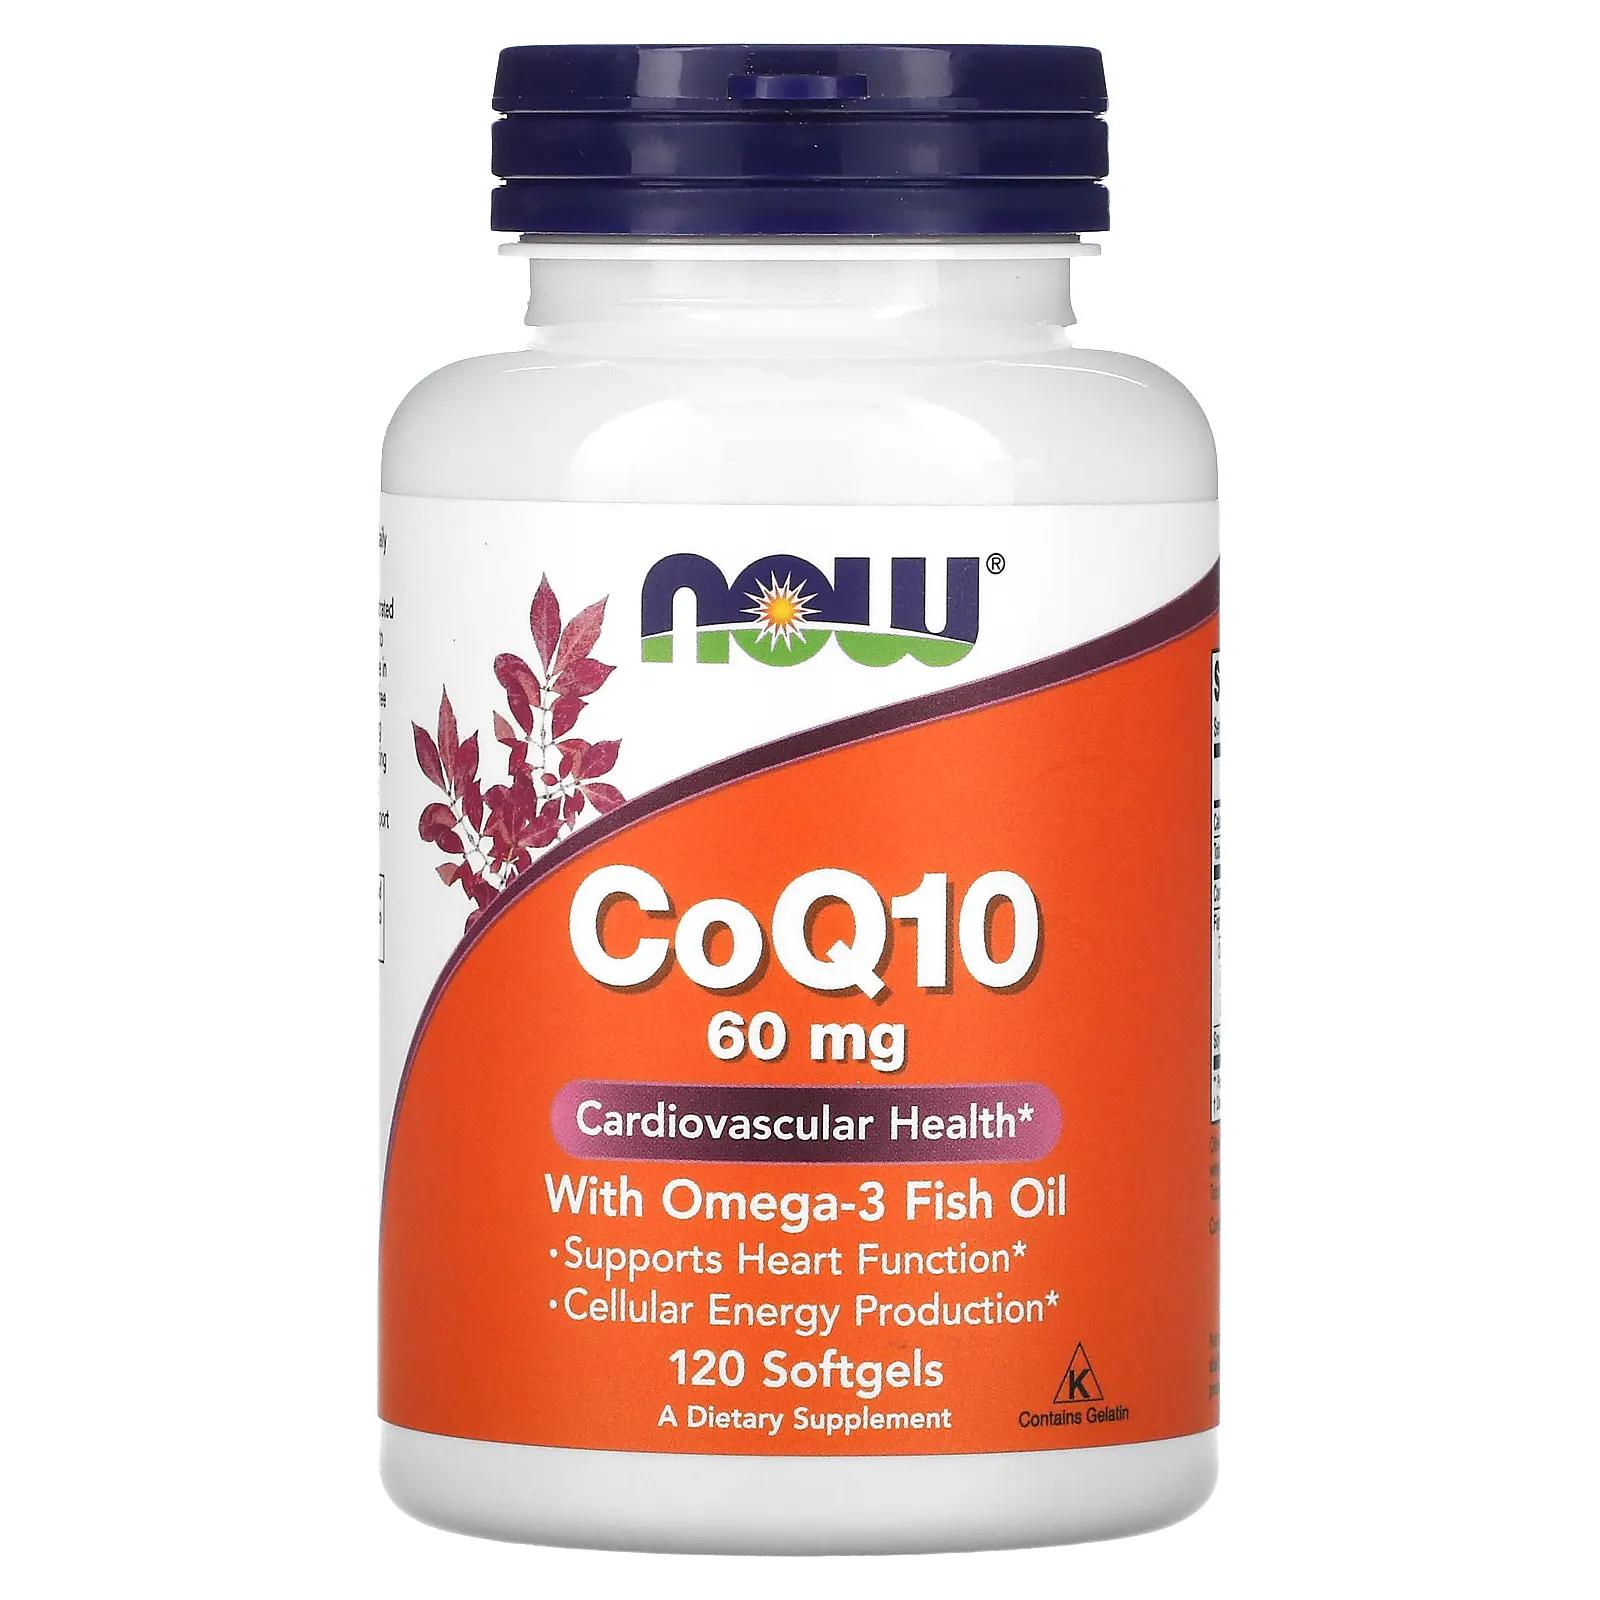 life extension super ubiquinol coq10 with enhanced mitochondrial support 100 mg 60 softgels Now Foods CoQ10 with Omega-3 Fish Oil 60 mg 120 Softgels